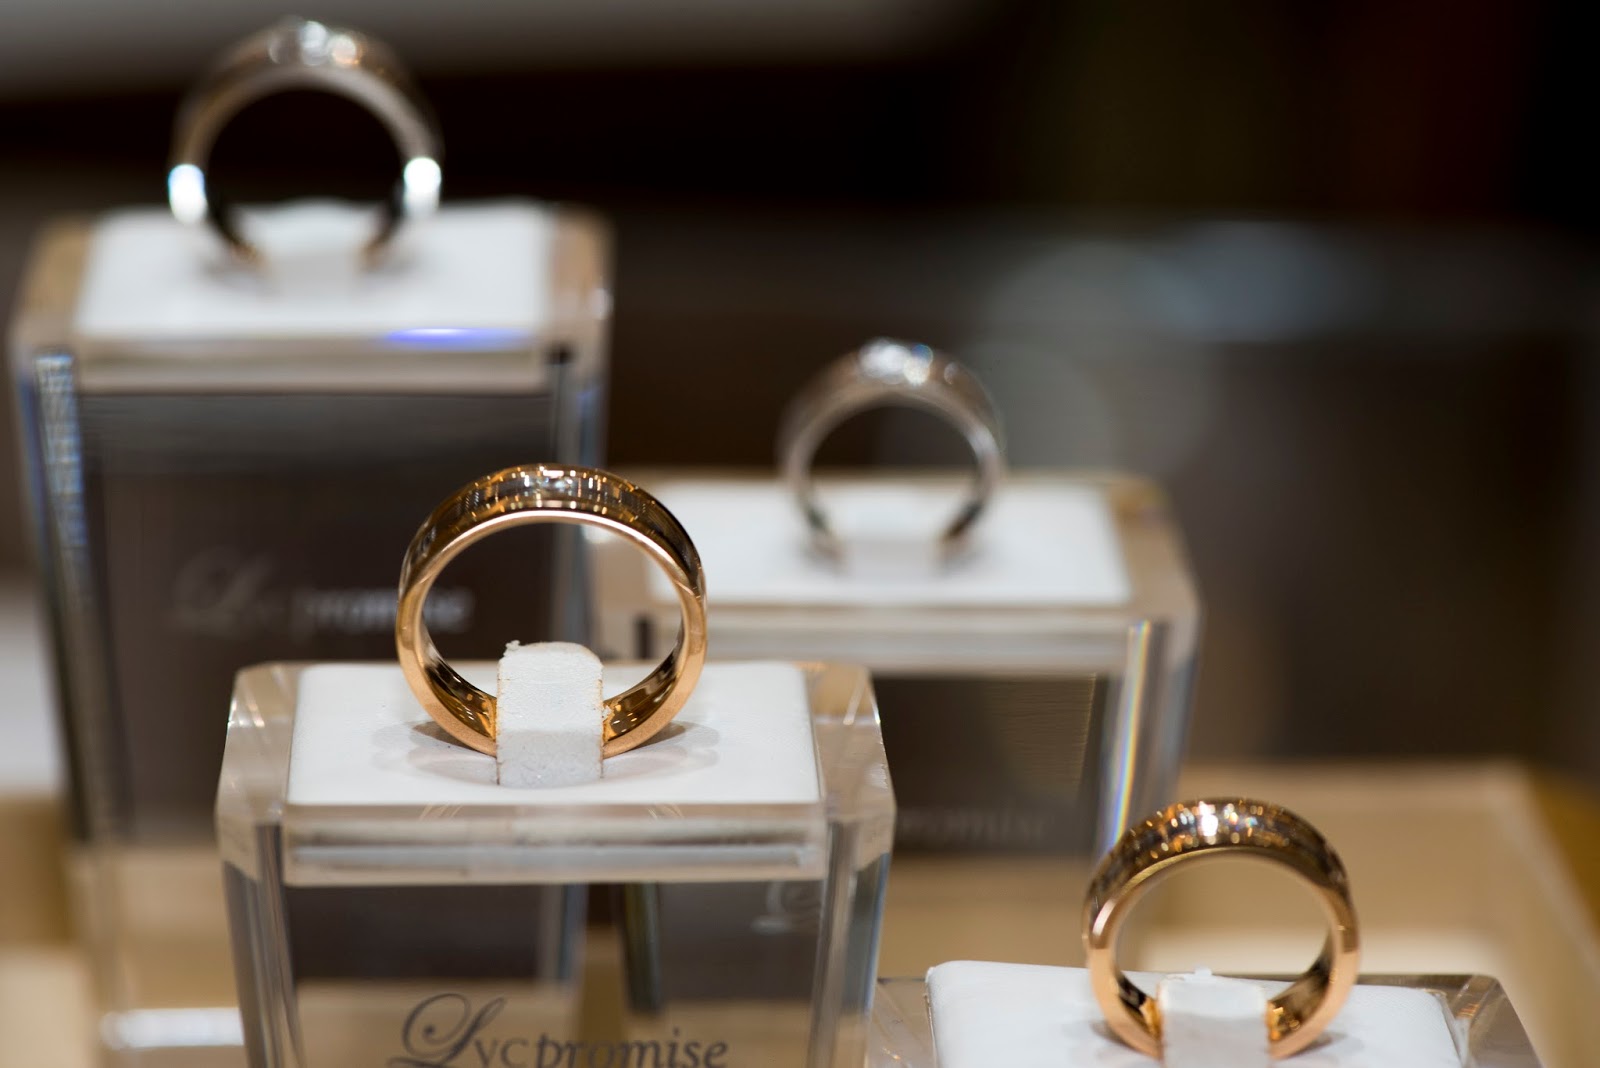 love and co wedding band price